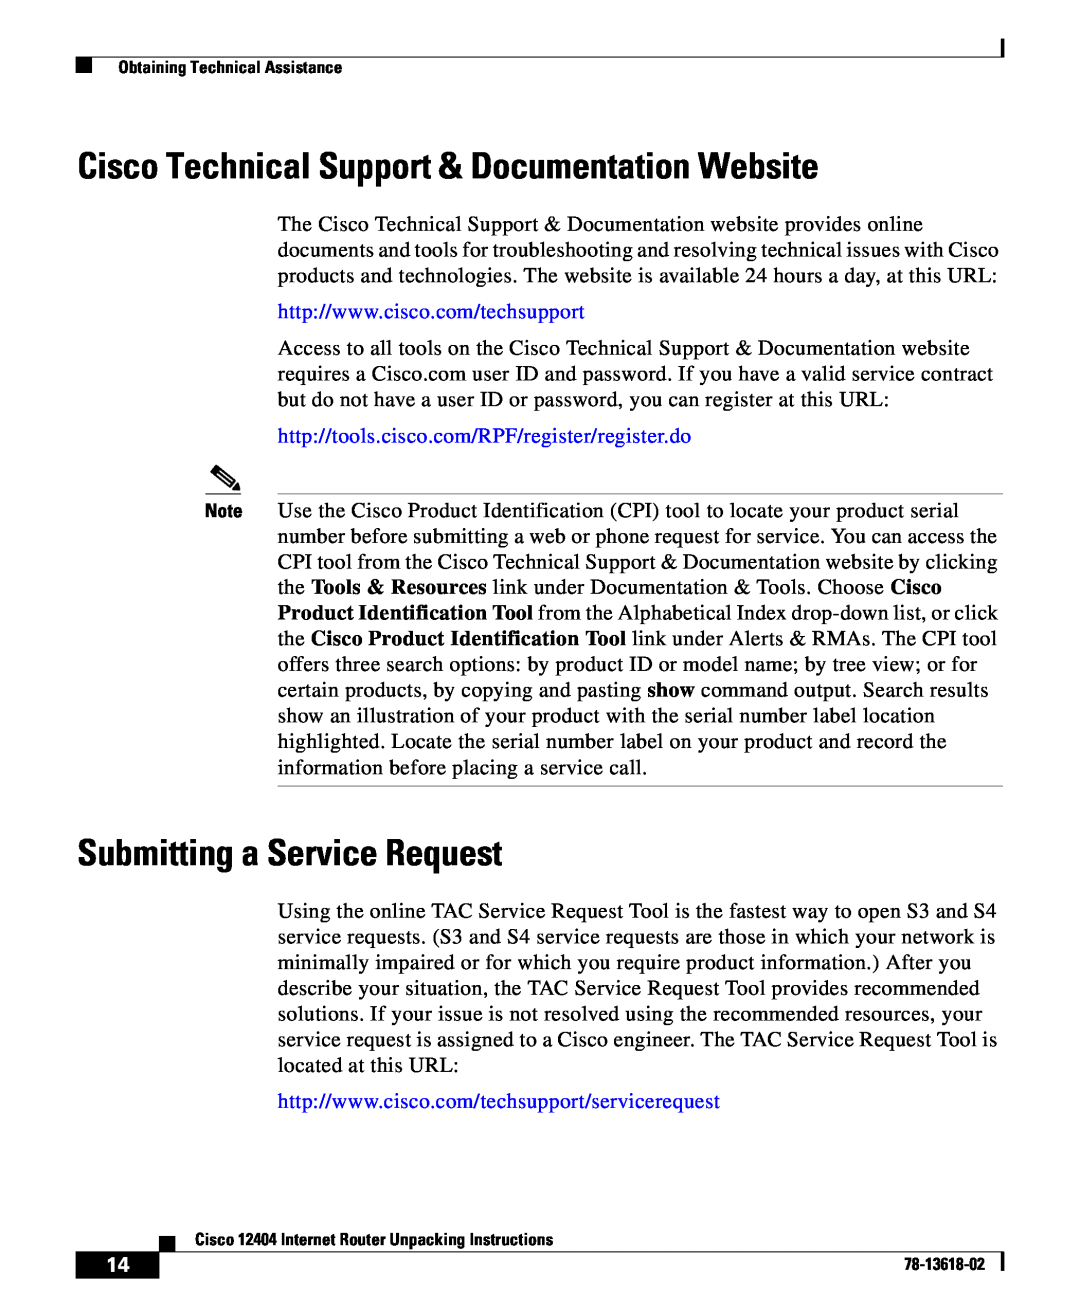 Cisco Systems 12404 manual Cisco Technical Support & Documentation Website, Submitting a Service Request 